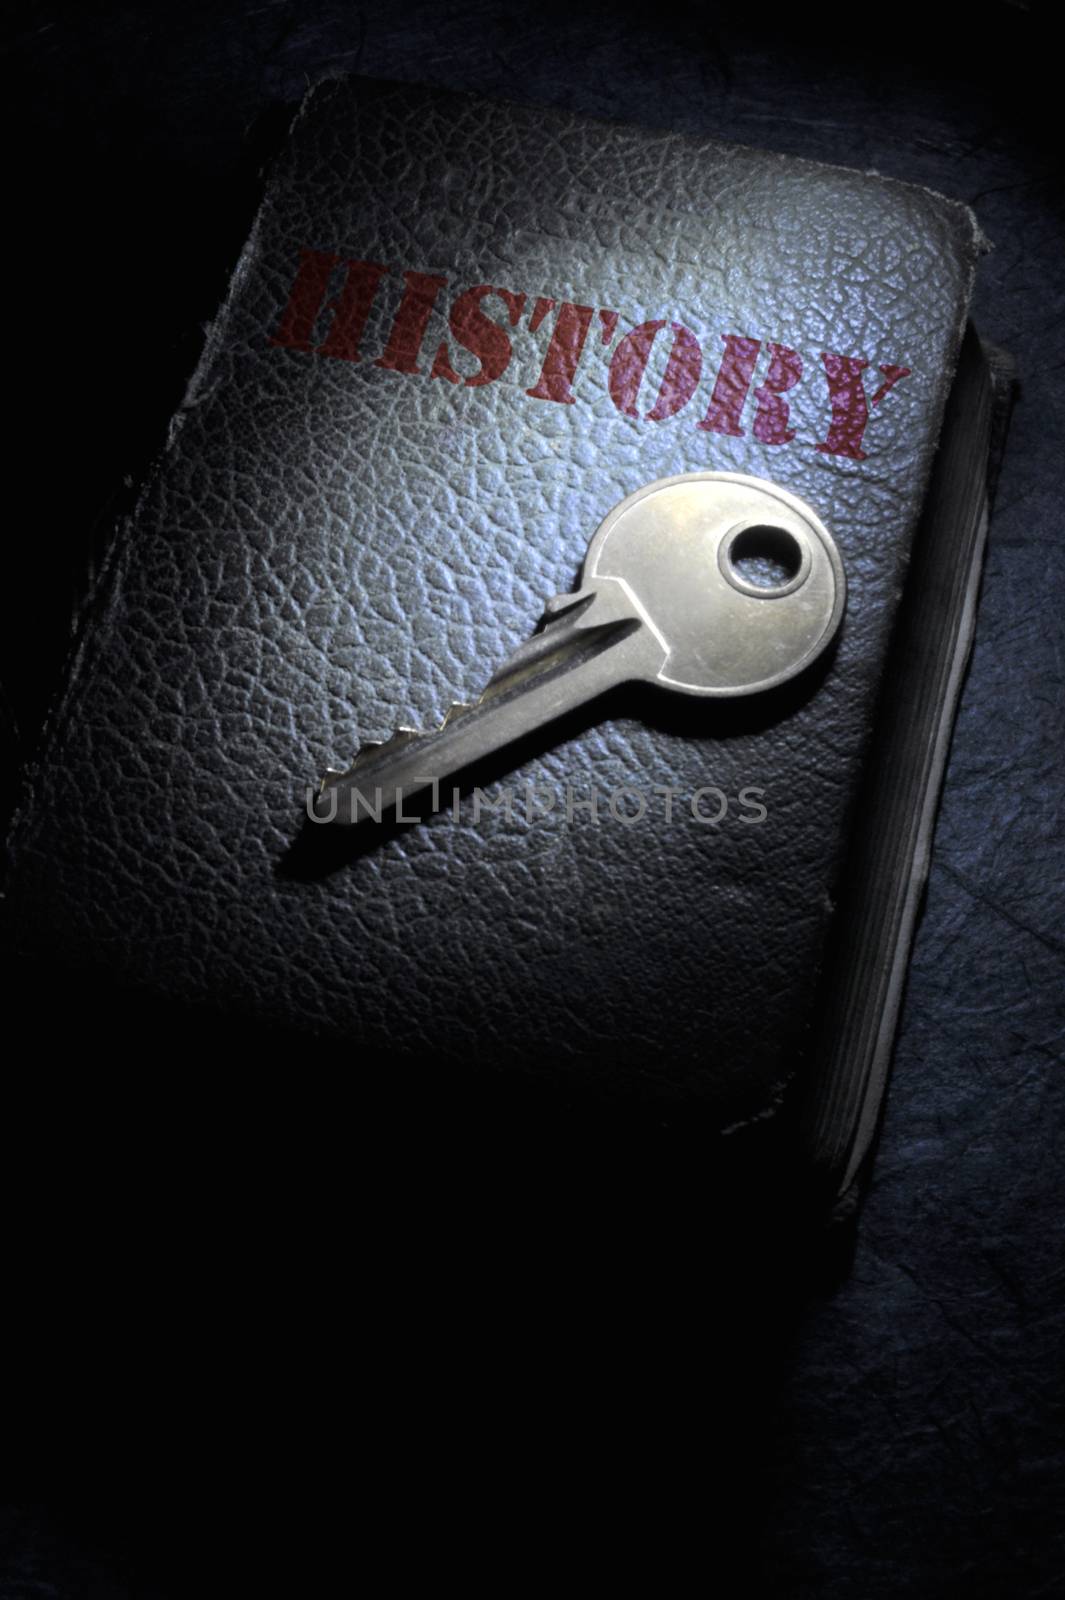 Key on top of an aged book